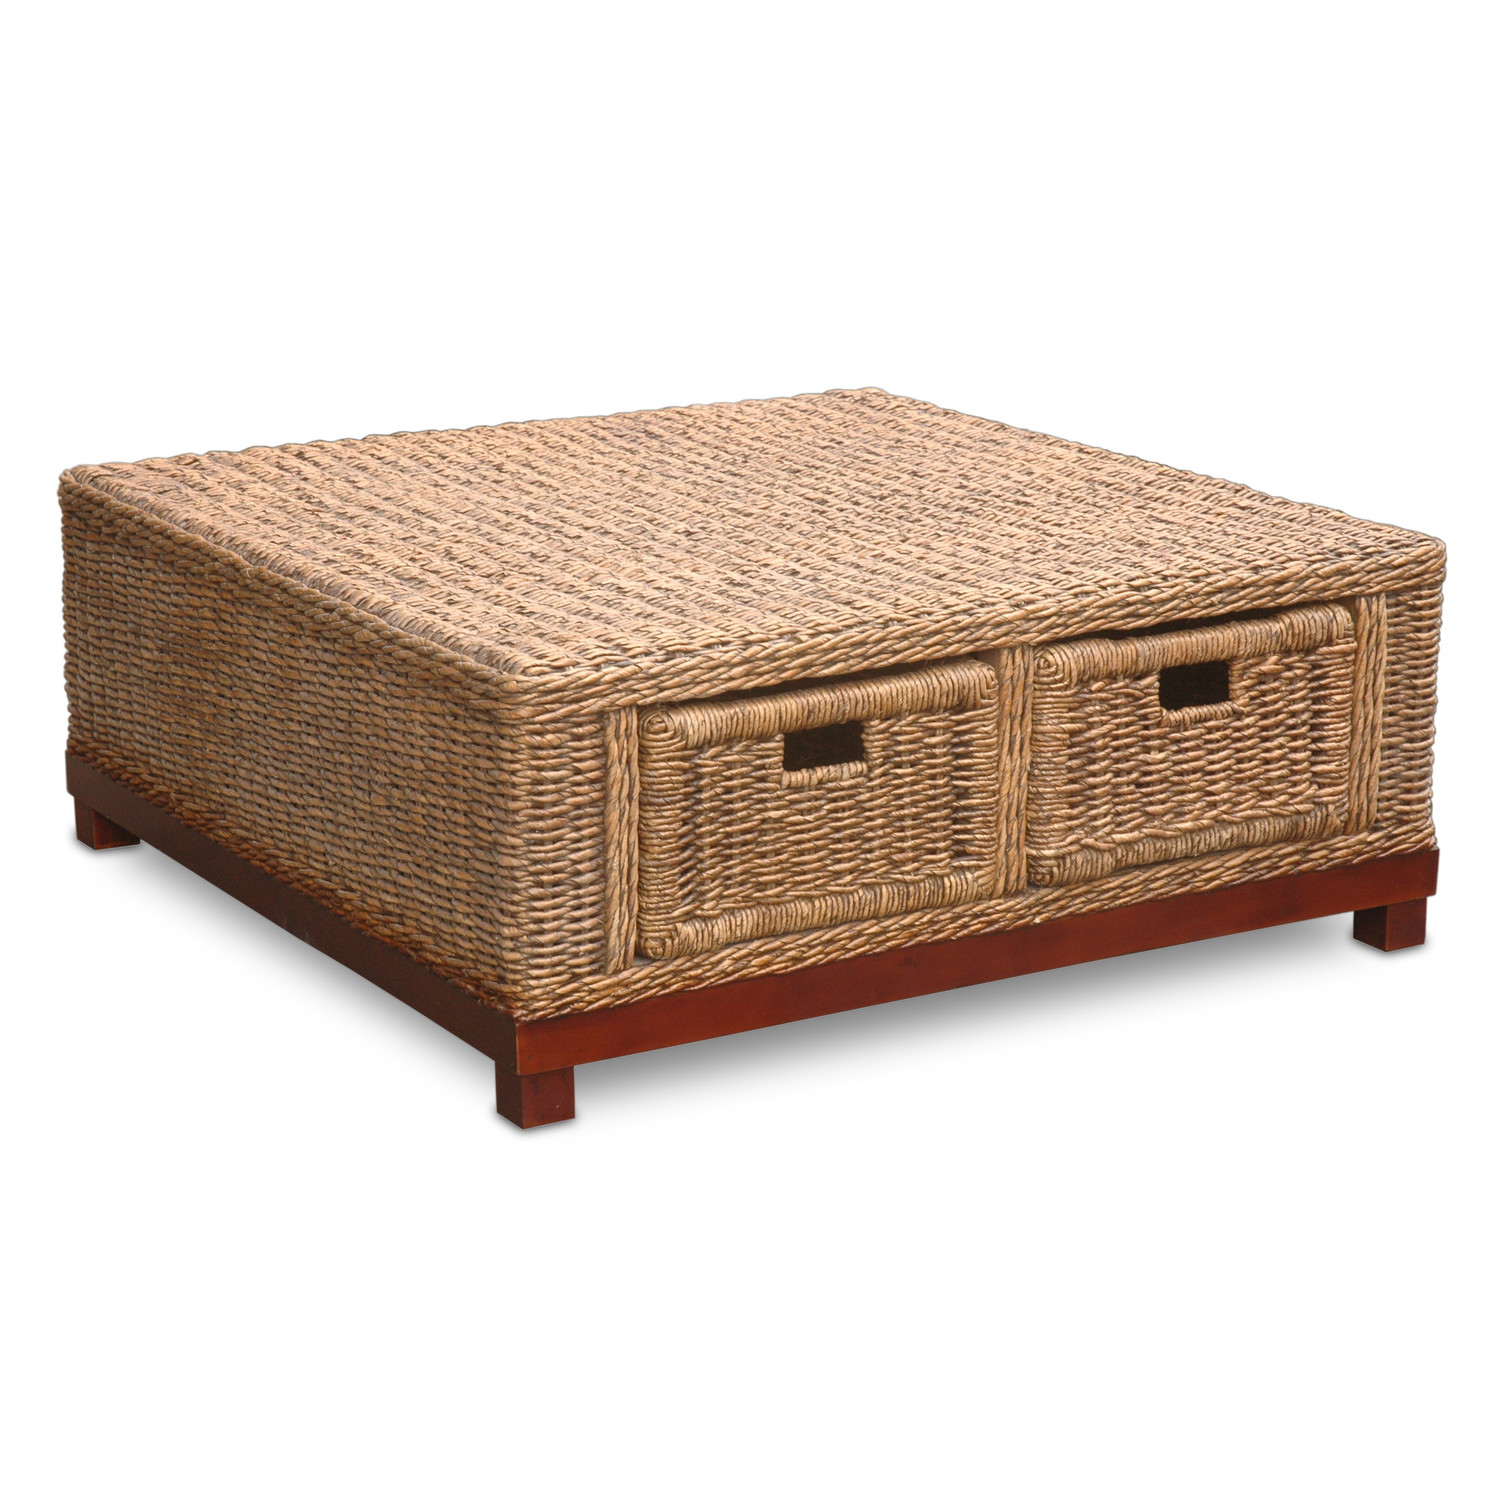 furniture creative wicker ott design for your living room idea basket chair footstool all weather accent table pouf pier one outdoor stor white west elm tripod old wood end tables